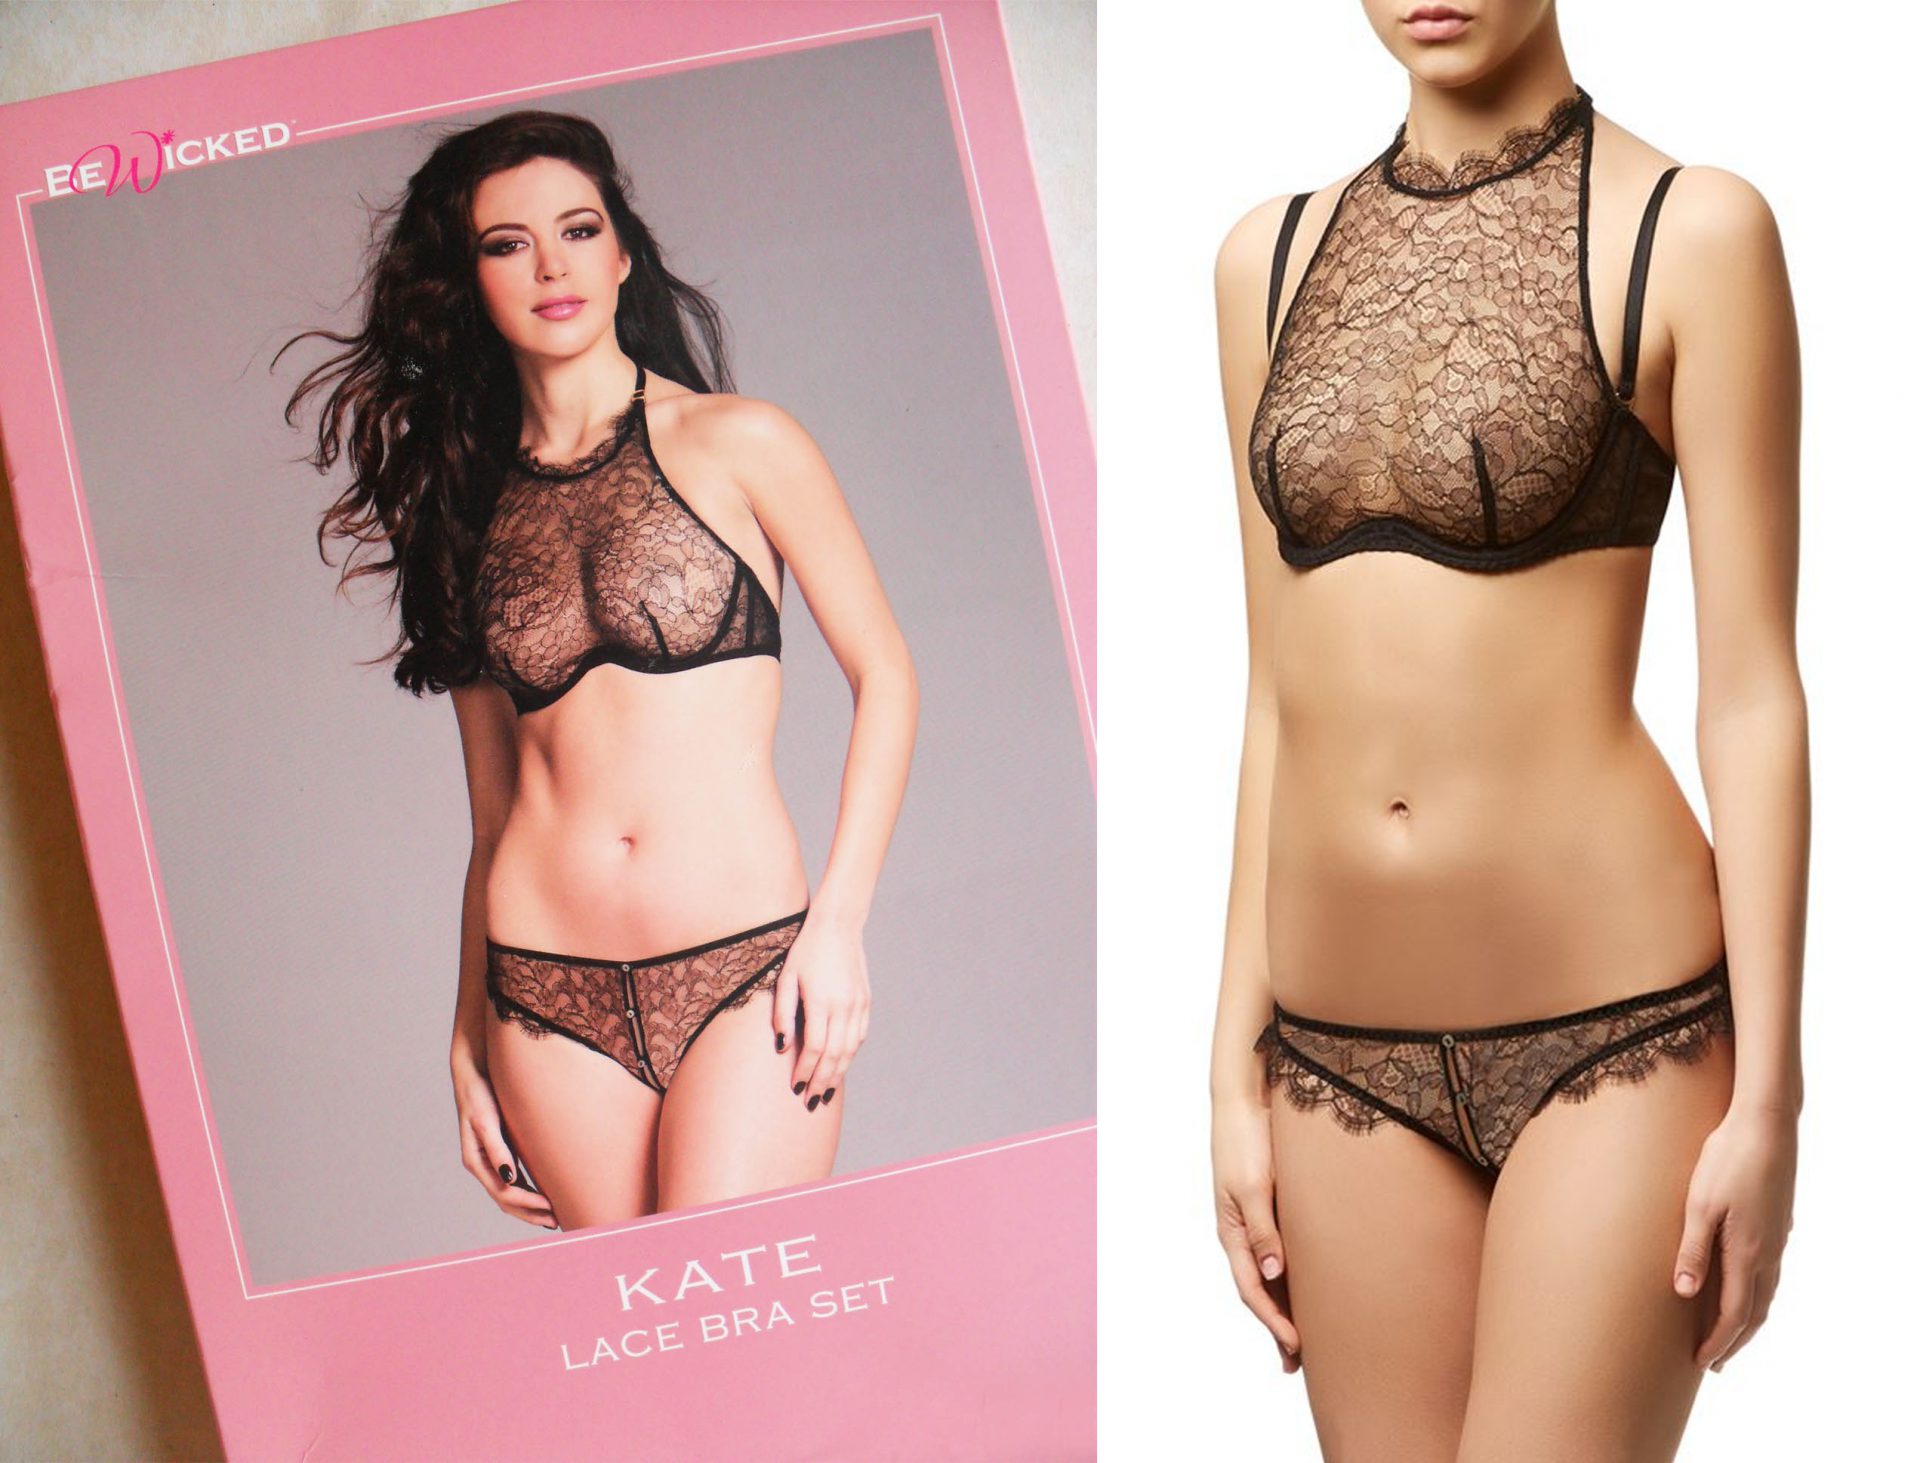 Knock-Off Lingerie Vs. The Original: Difference in | Lingerie